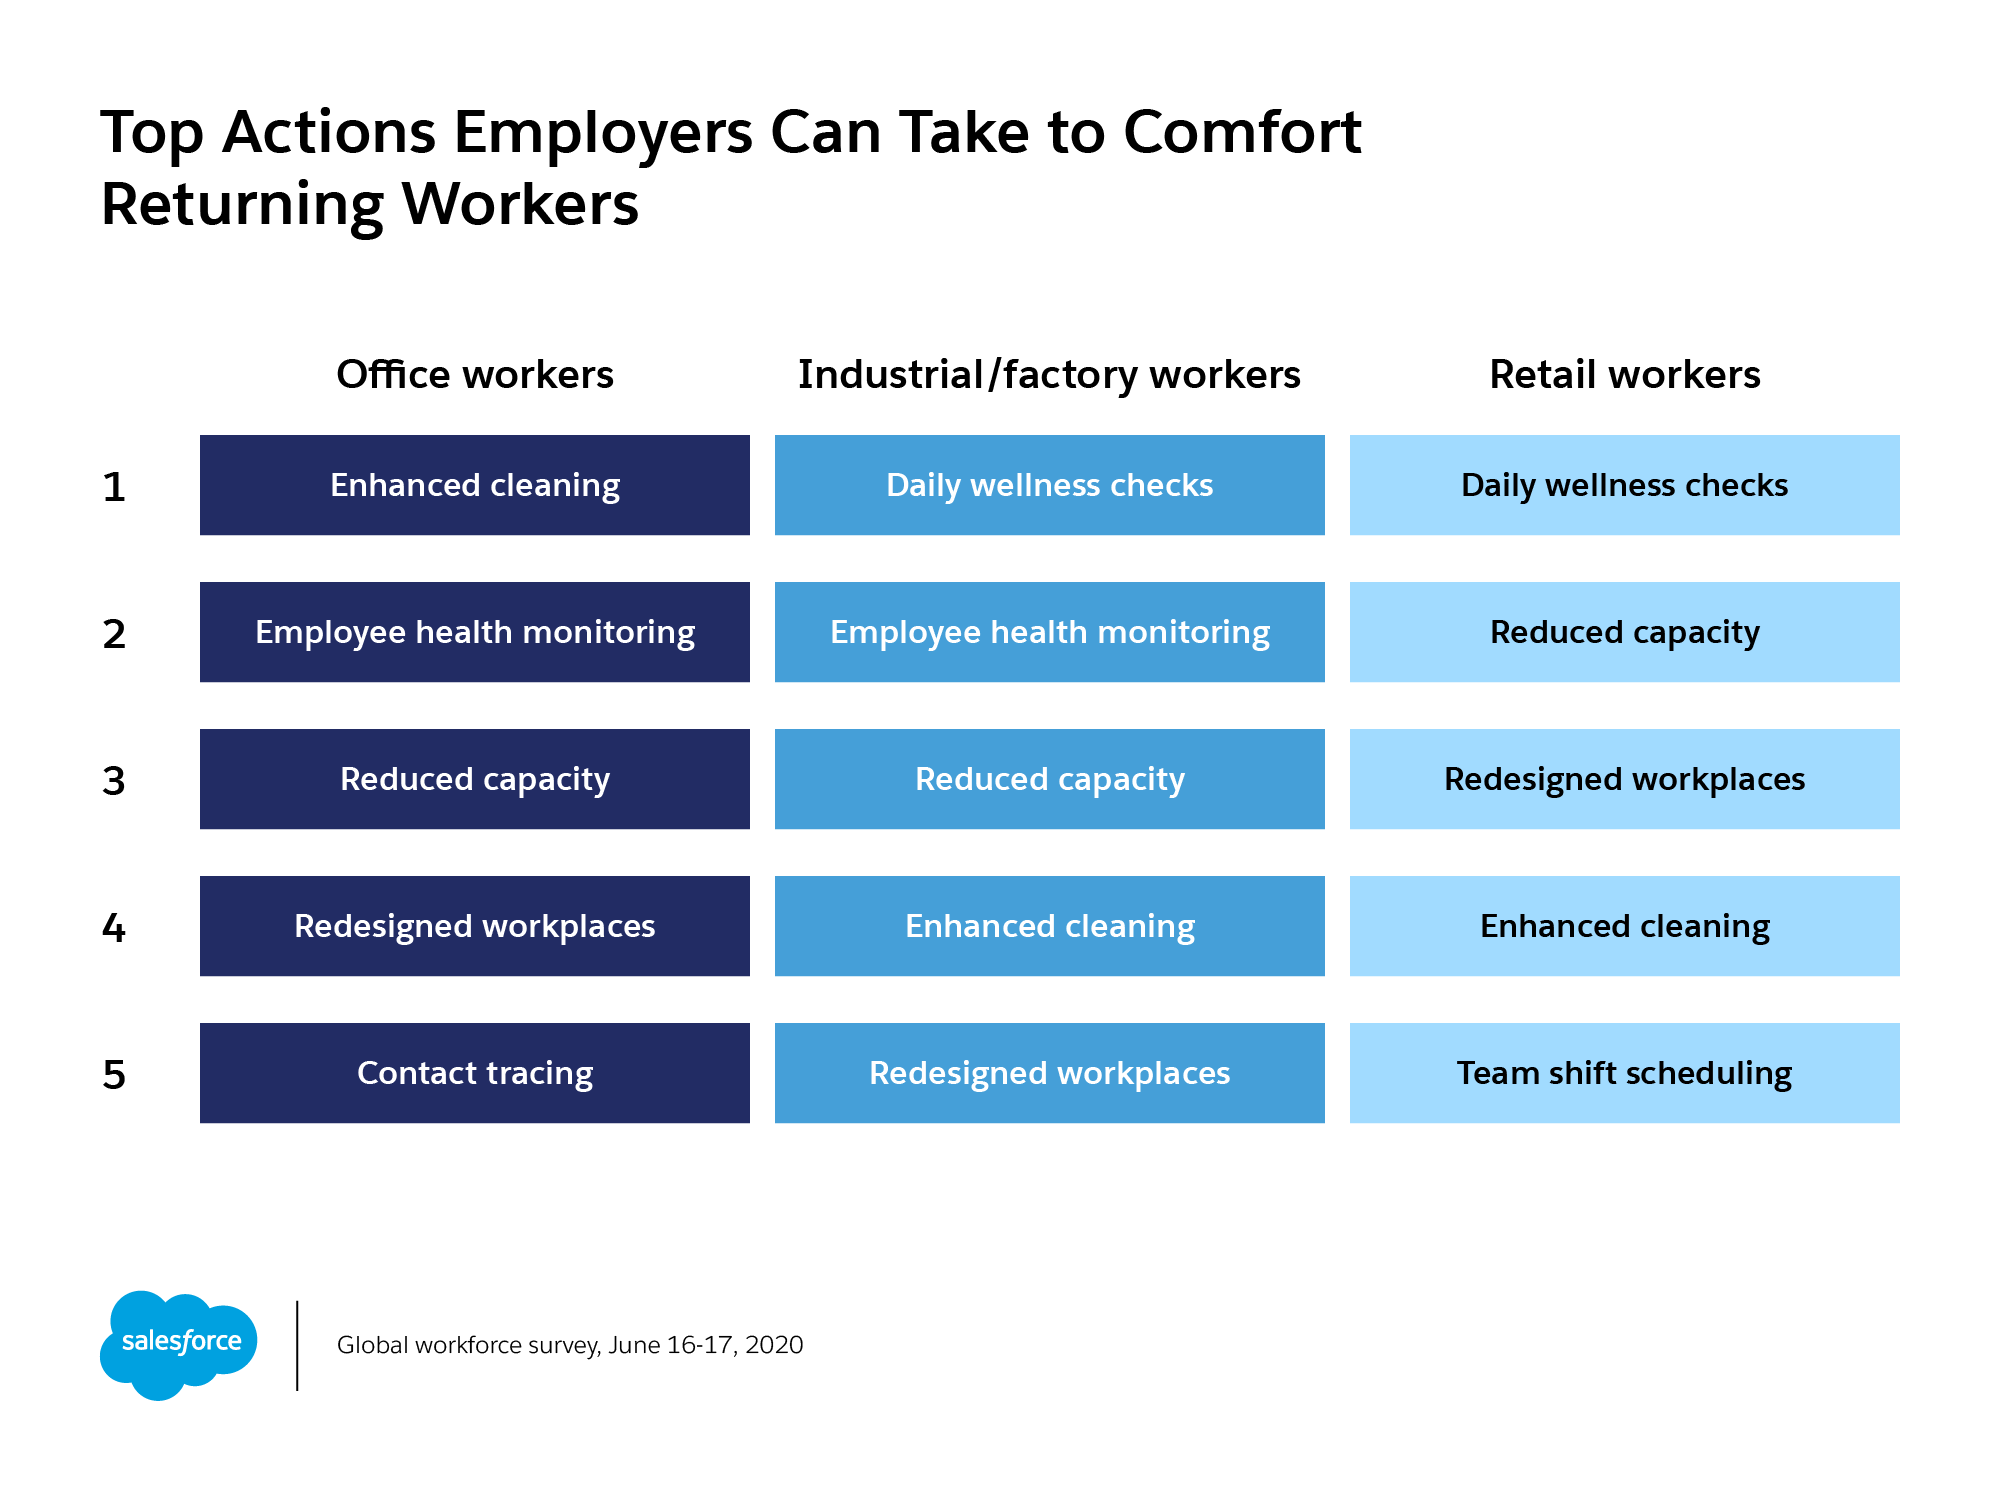 Survey reveals top actions employers can take to comfort workers